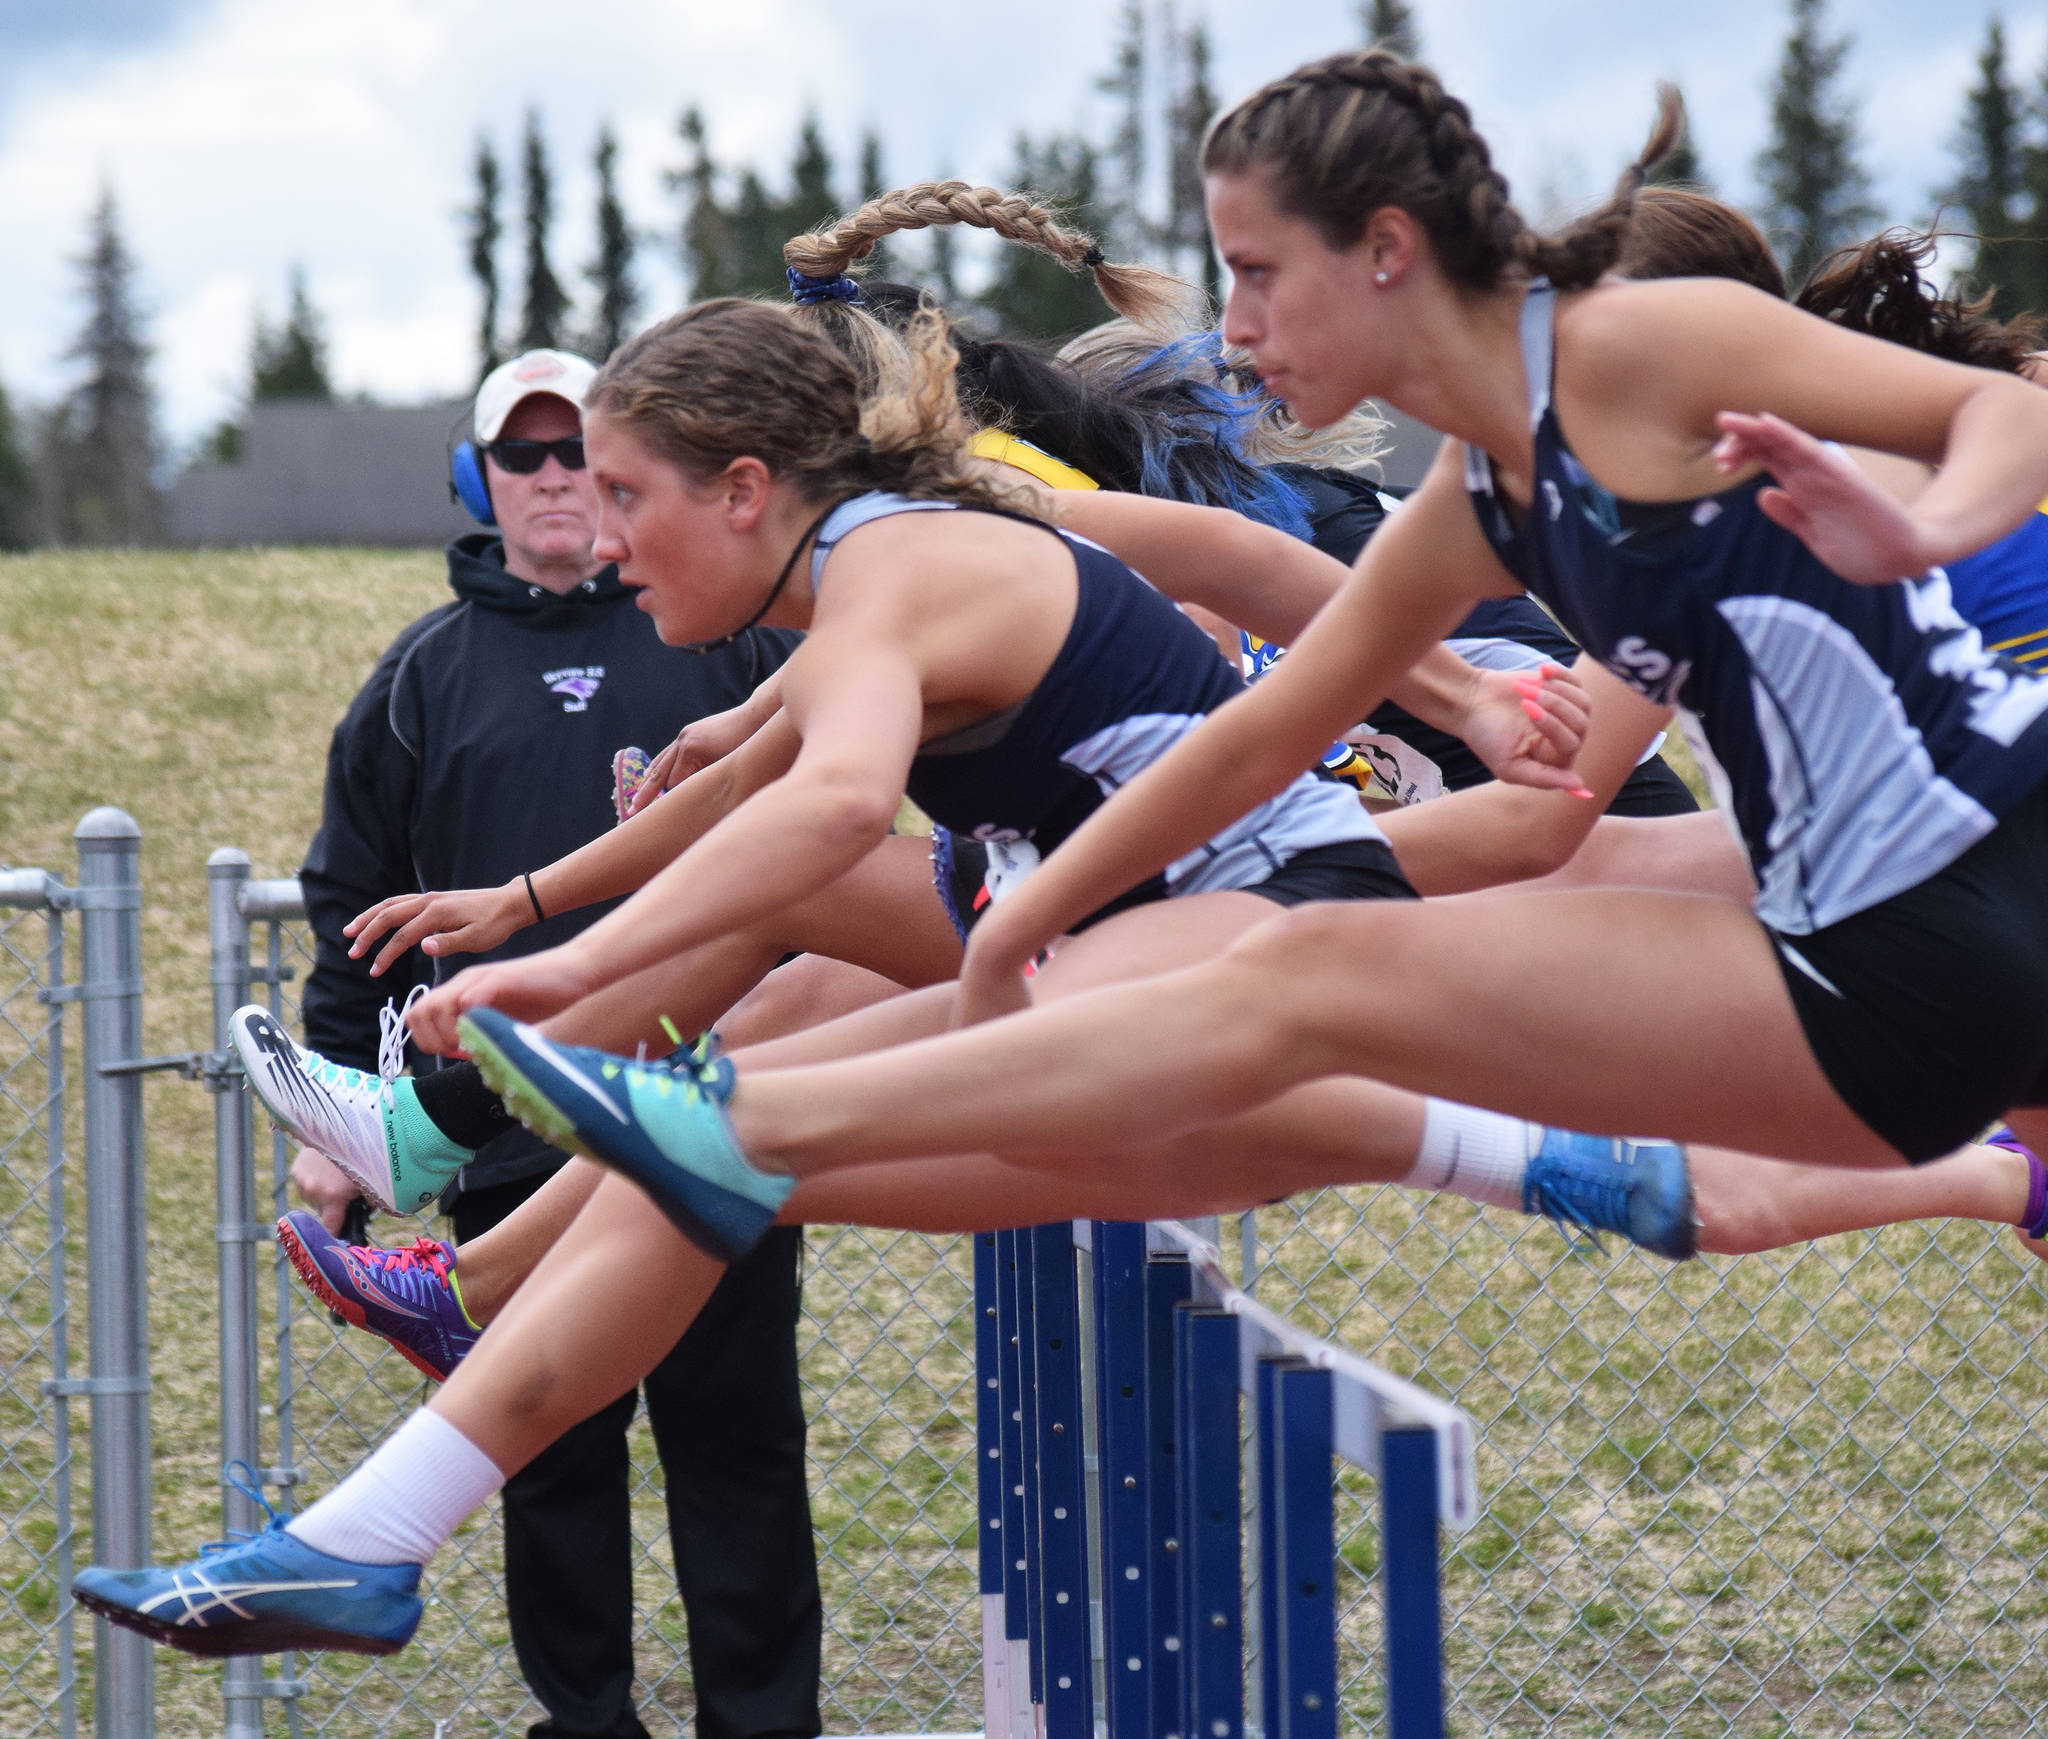 Soldotna’s Kylie Ness (left) and teammate Sophie Thomas lead the pack over the first hurdle in the Class 3A girls 100-meter hurdles Saturday, May 18, 2019, at the Region III Track and Field Championships in Soldotna, Alaska. (Photo by Joey Klecka/Peninsula Clarion)